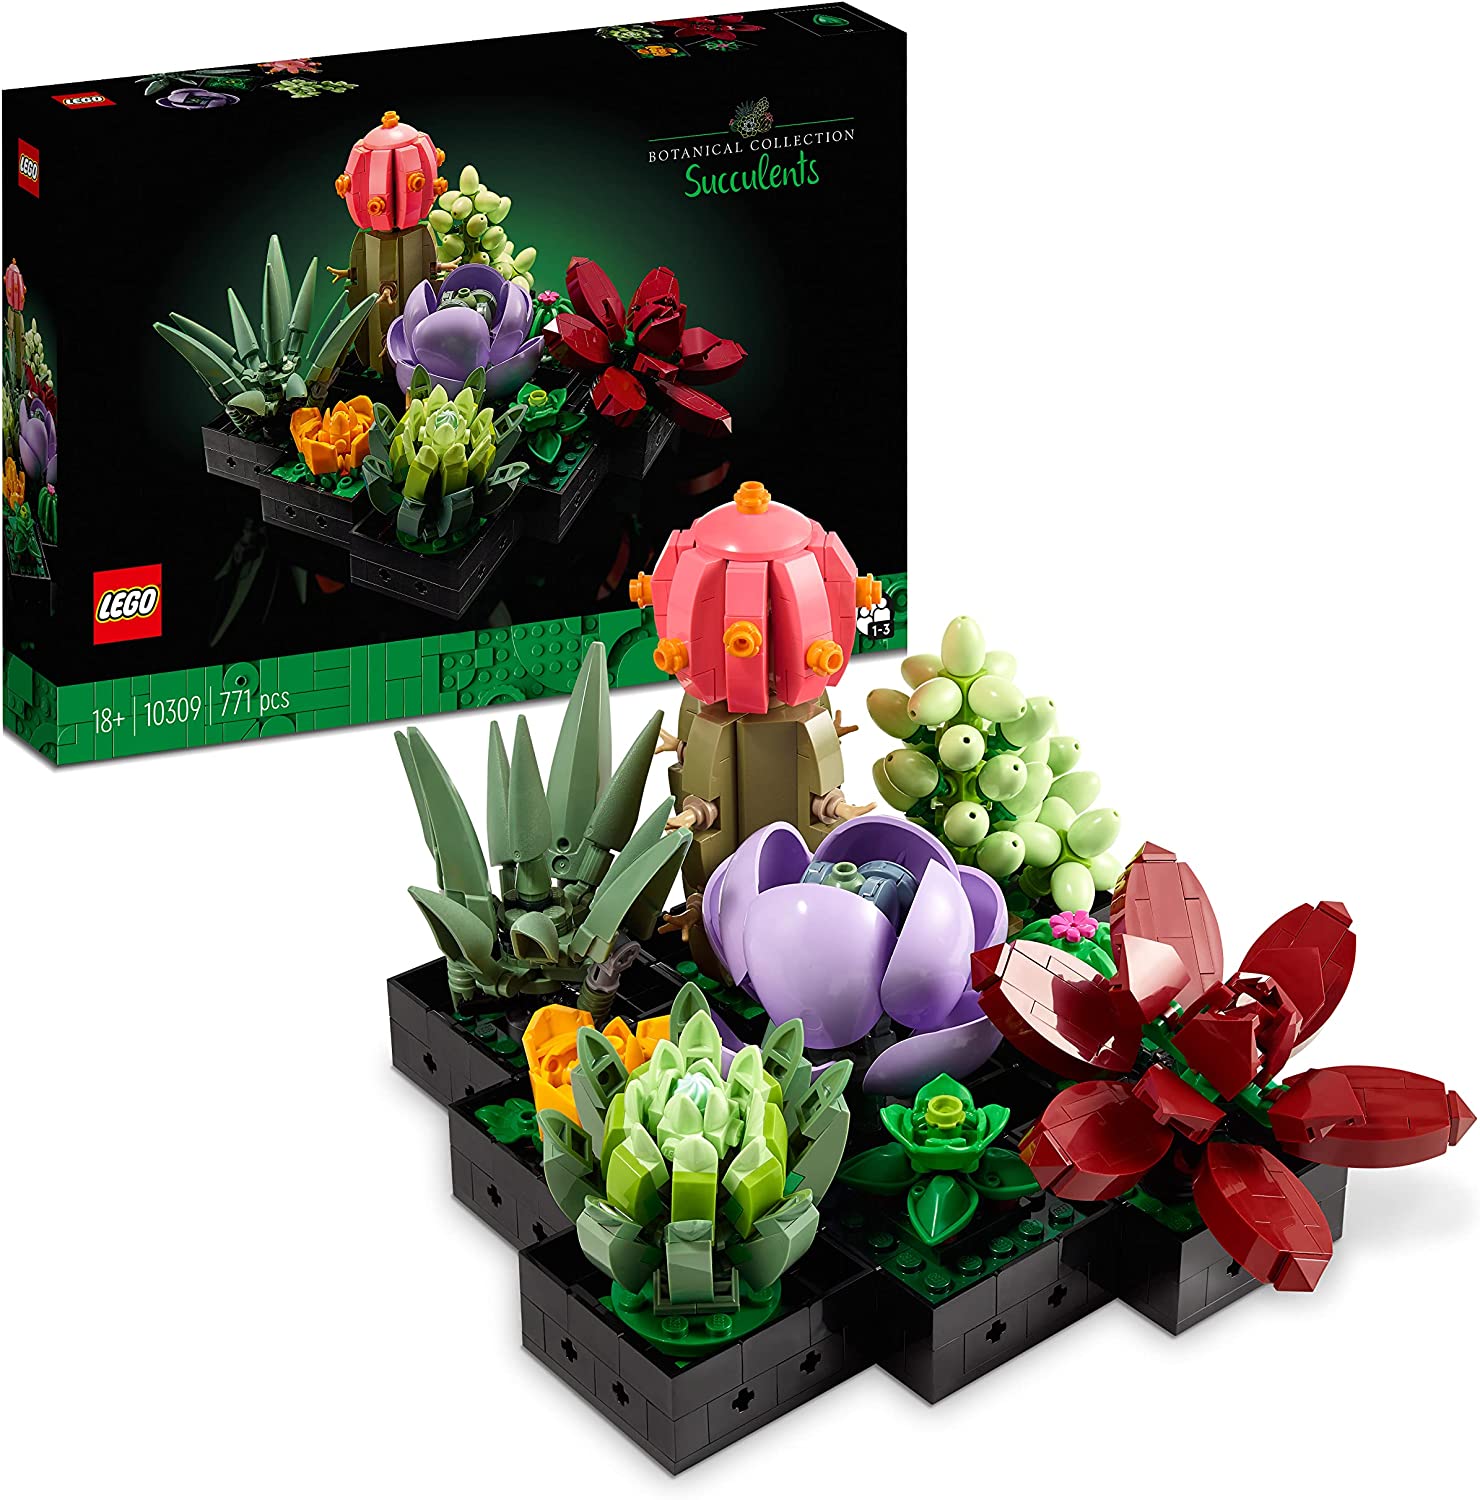 LEGO 10309 Succulent Plants Botanical Collection Set for Adults for Crafting Room Decoration with 9 Buildable Artificial Mini Plants, Home Decoration